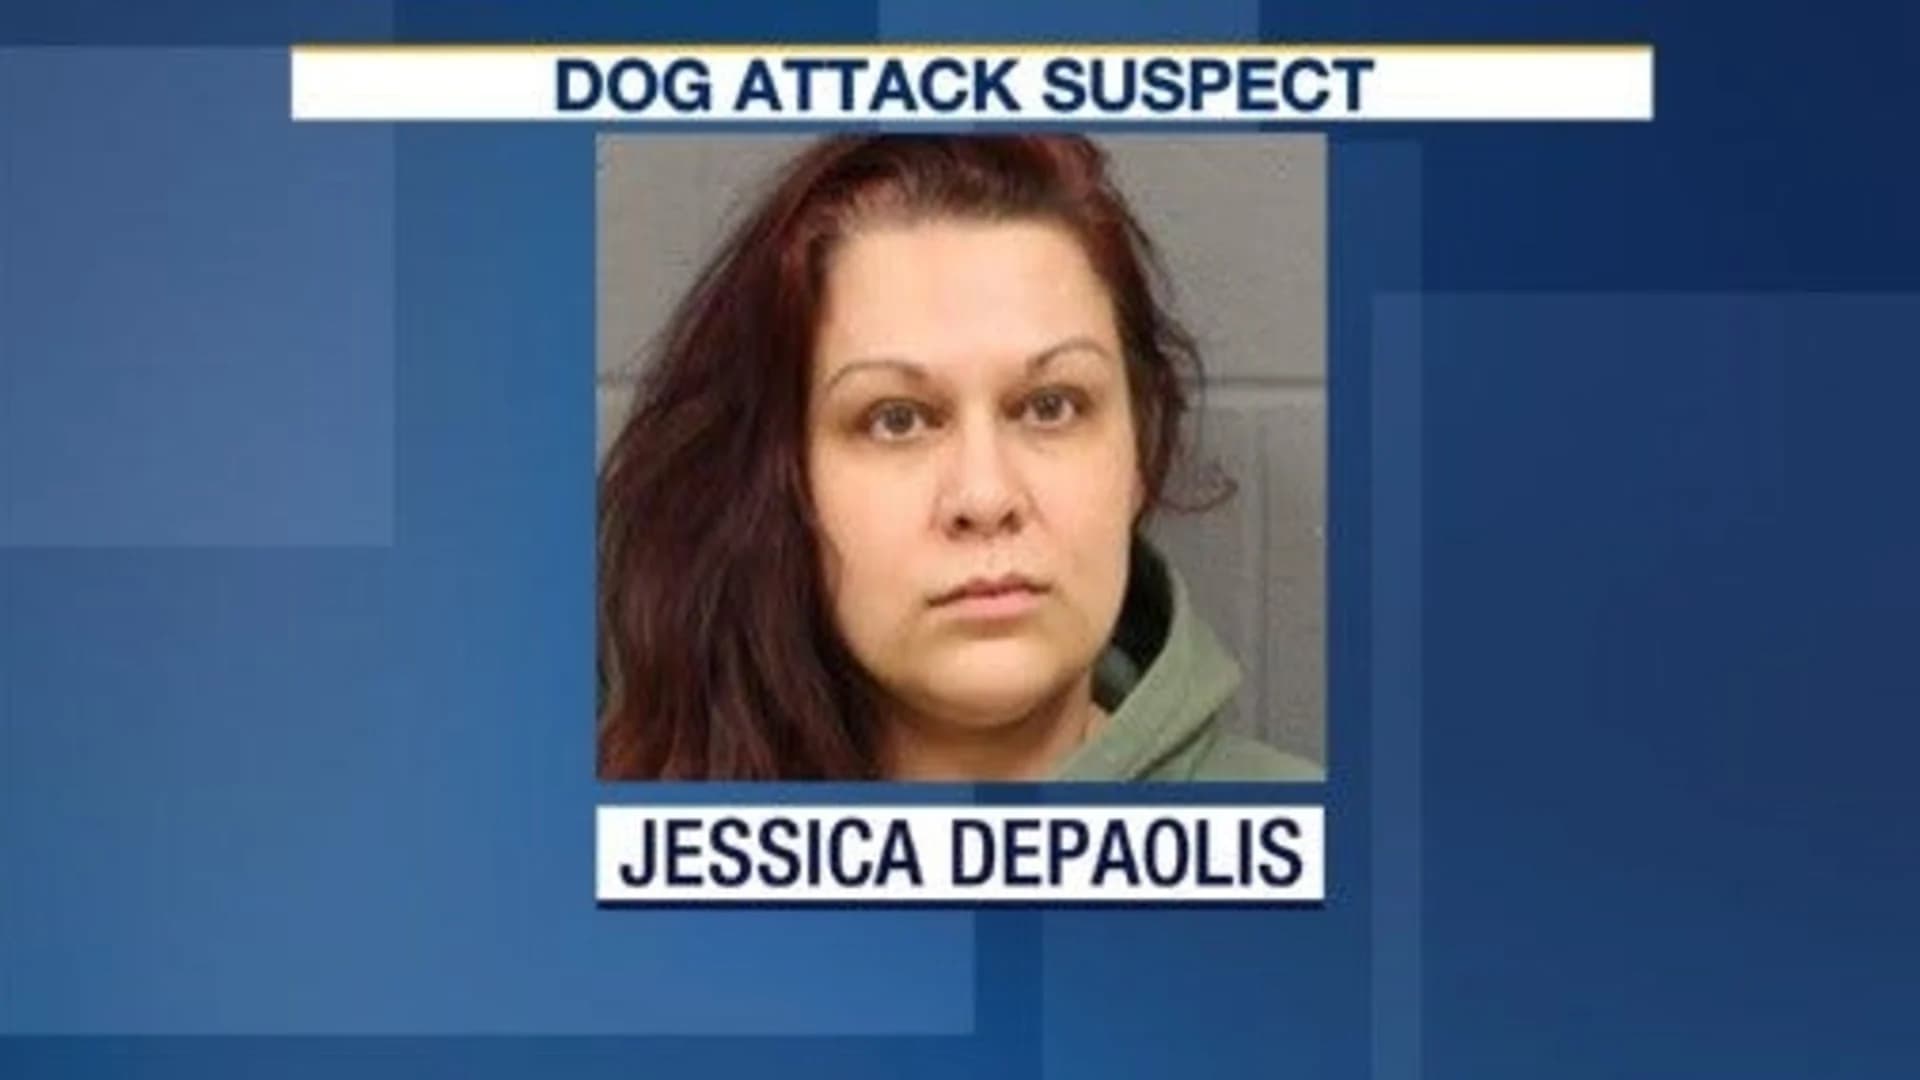 New Britain woman faces charges after bulldog attacks relatives